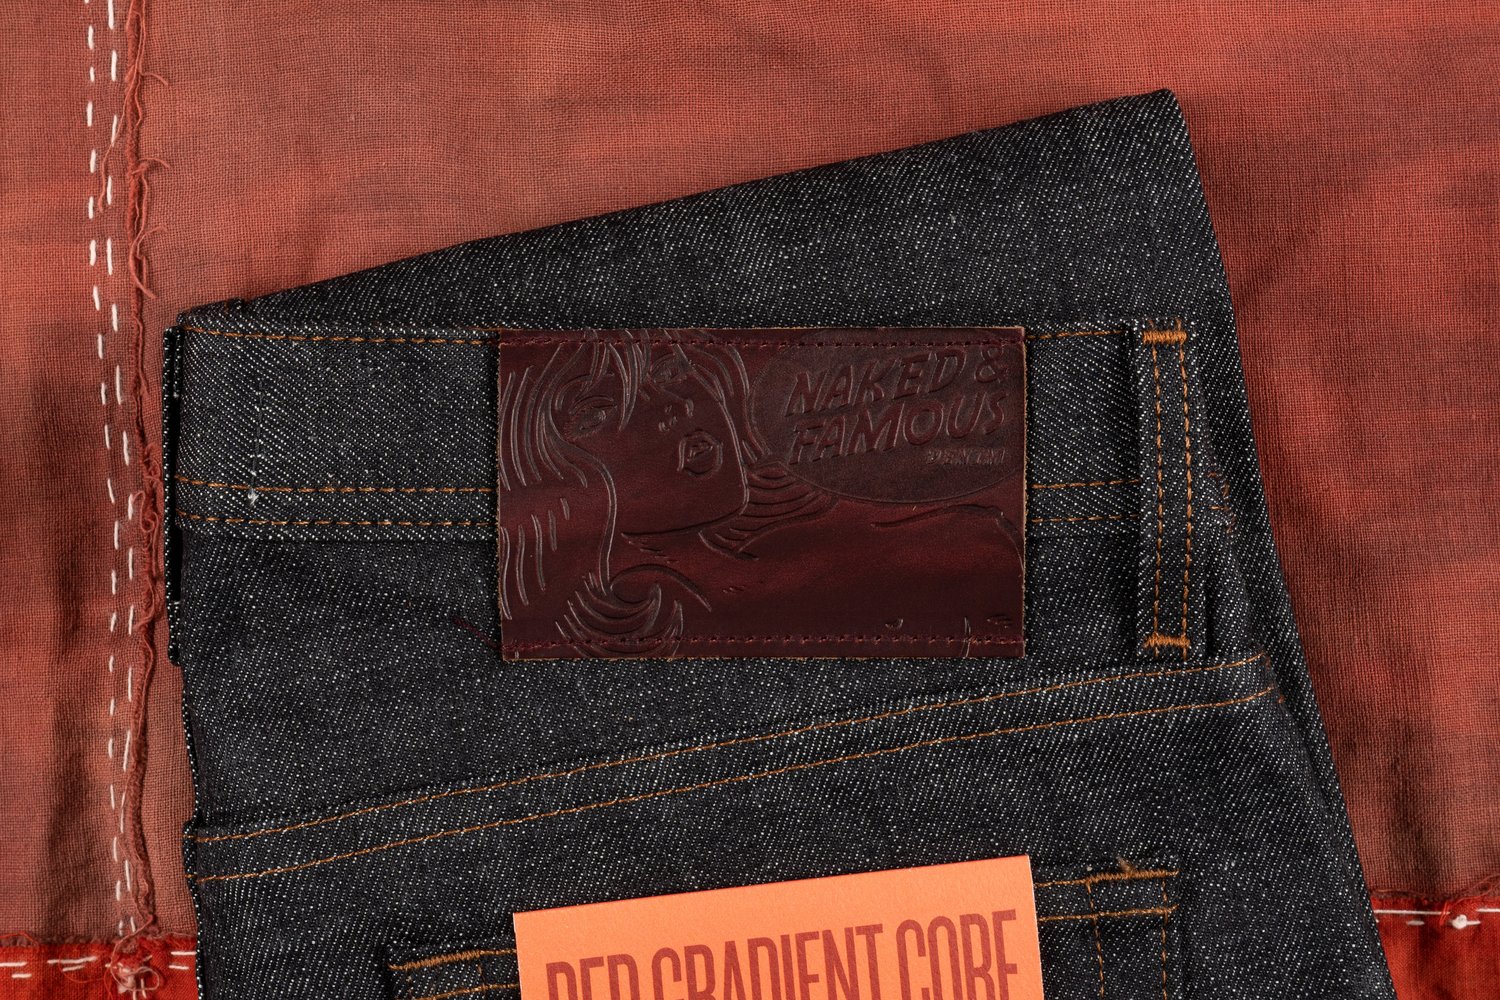 Red Gradient Core Selvedge - Leather Patch